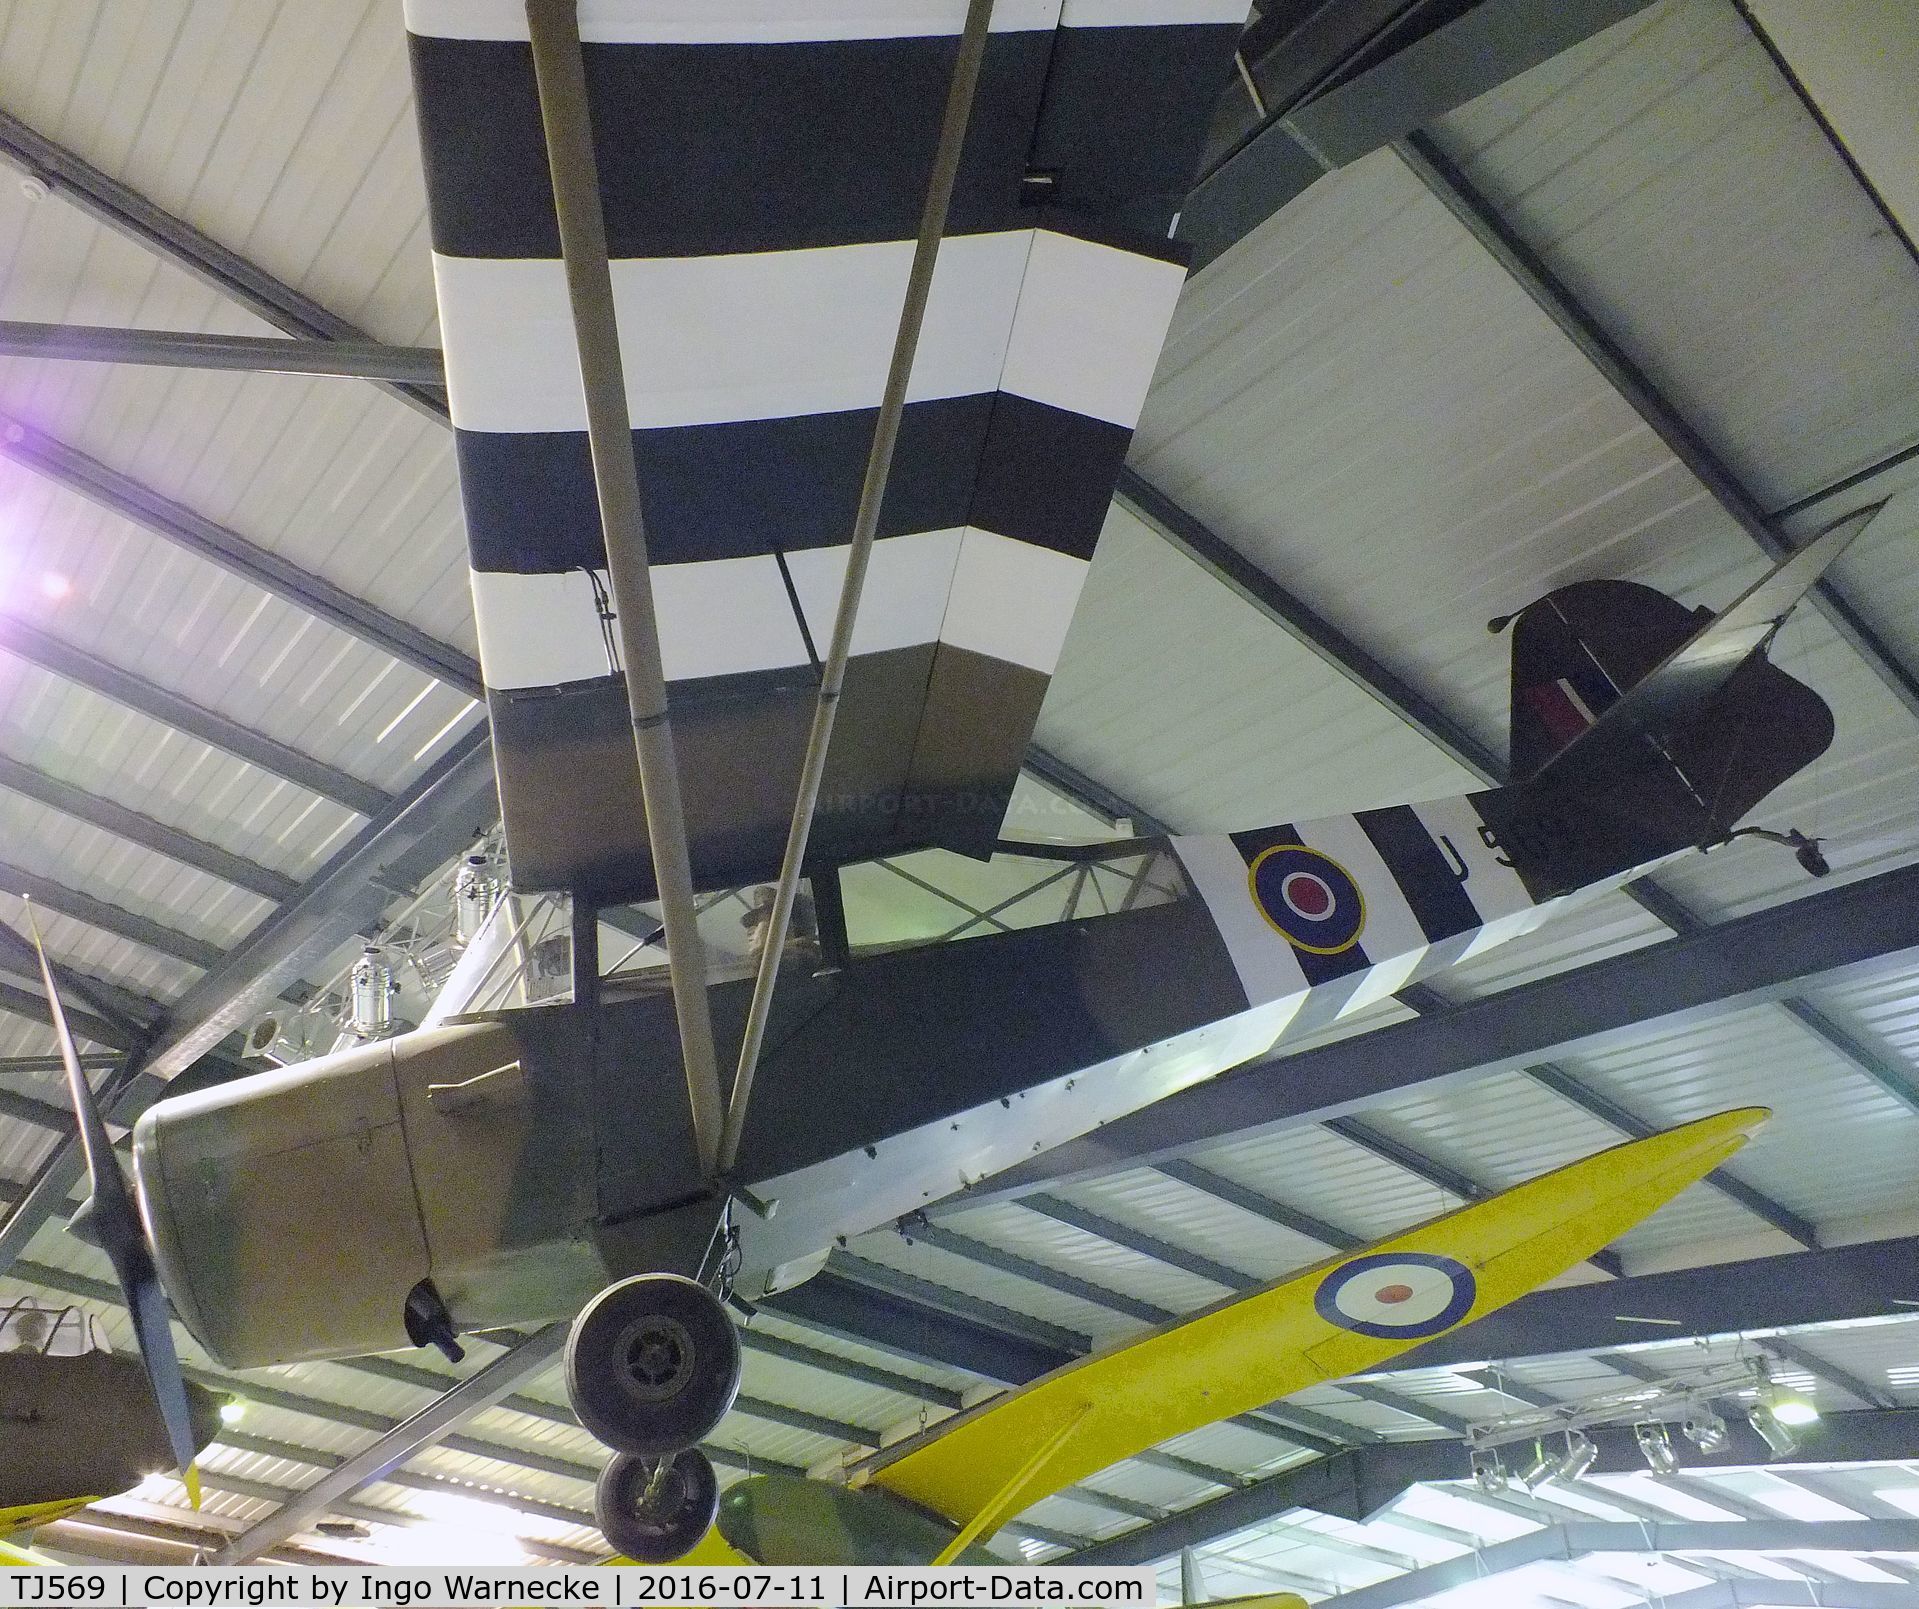 TJ569, 1945 Taylorcraft J Auster 5 C/N 1579, Taylorcraft J Auster 5 at the Museum of Army Flying, Middle Wallop